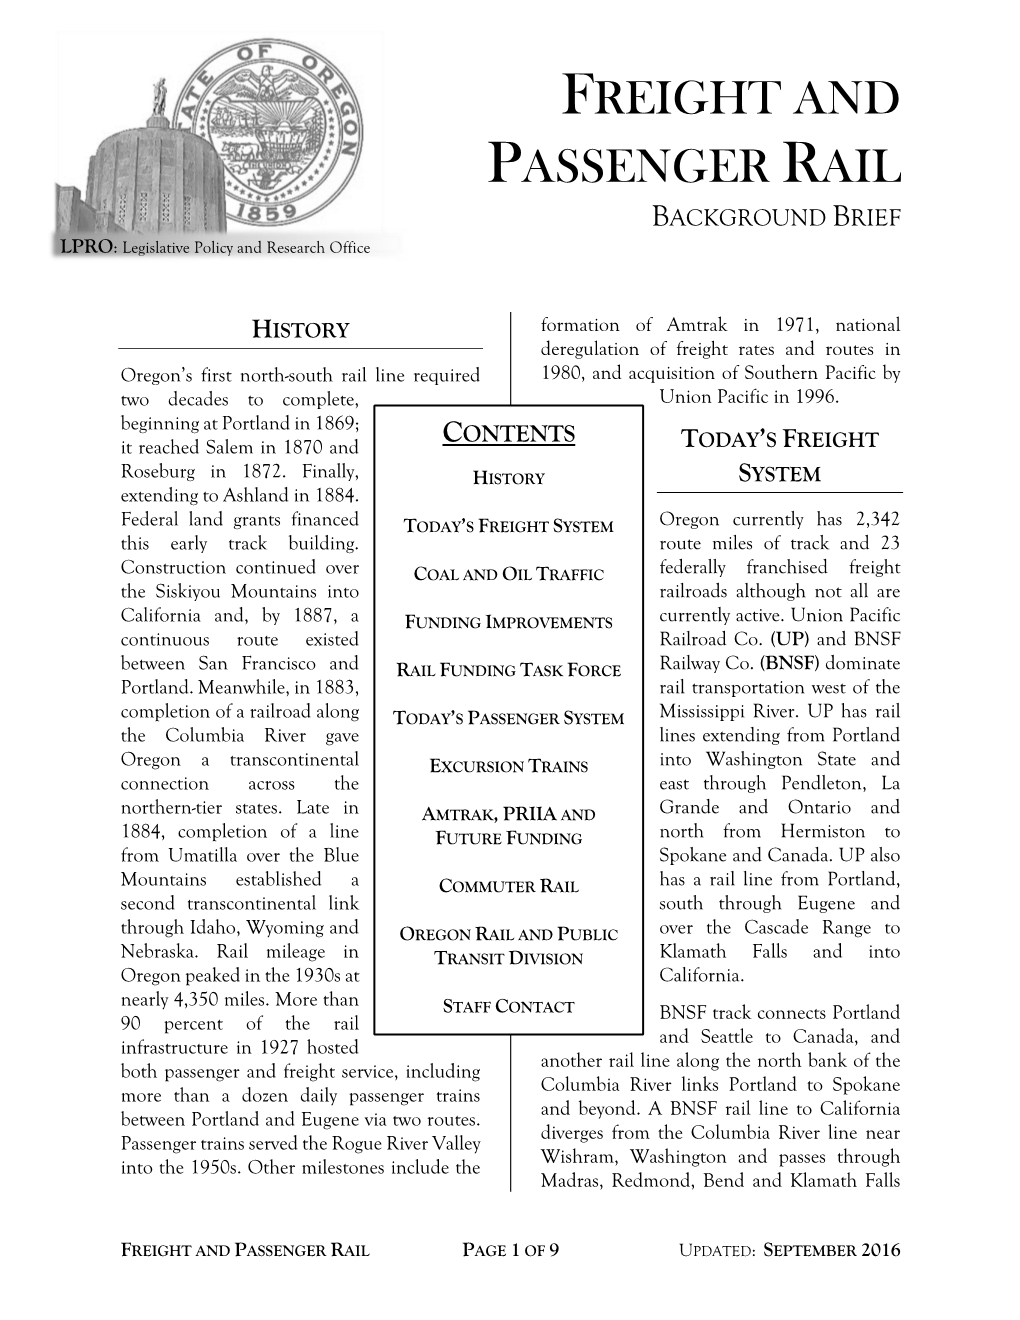 FREIGHT and PASSENGER RAIL BACKGROUND BRIEF LPRO: Legislative Policy and Research Office